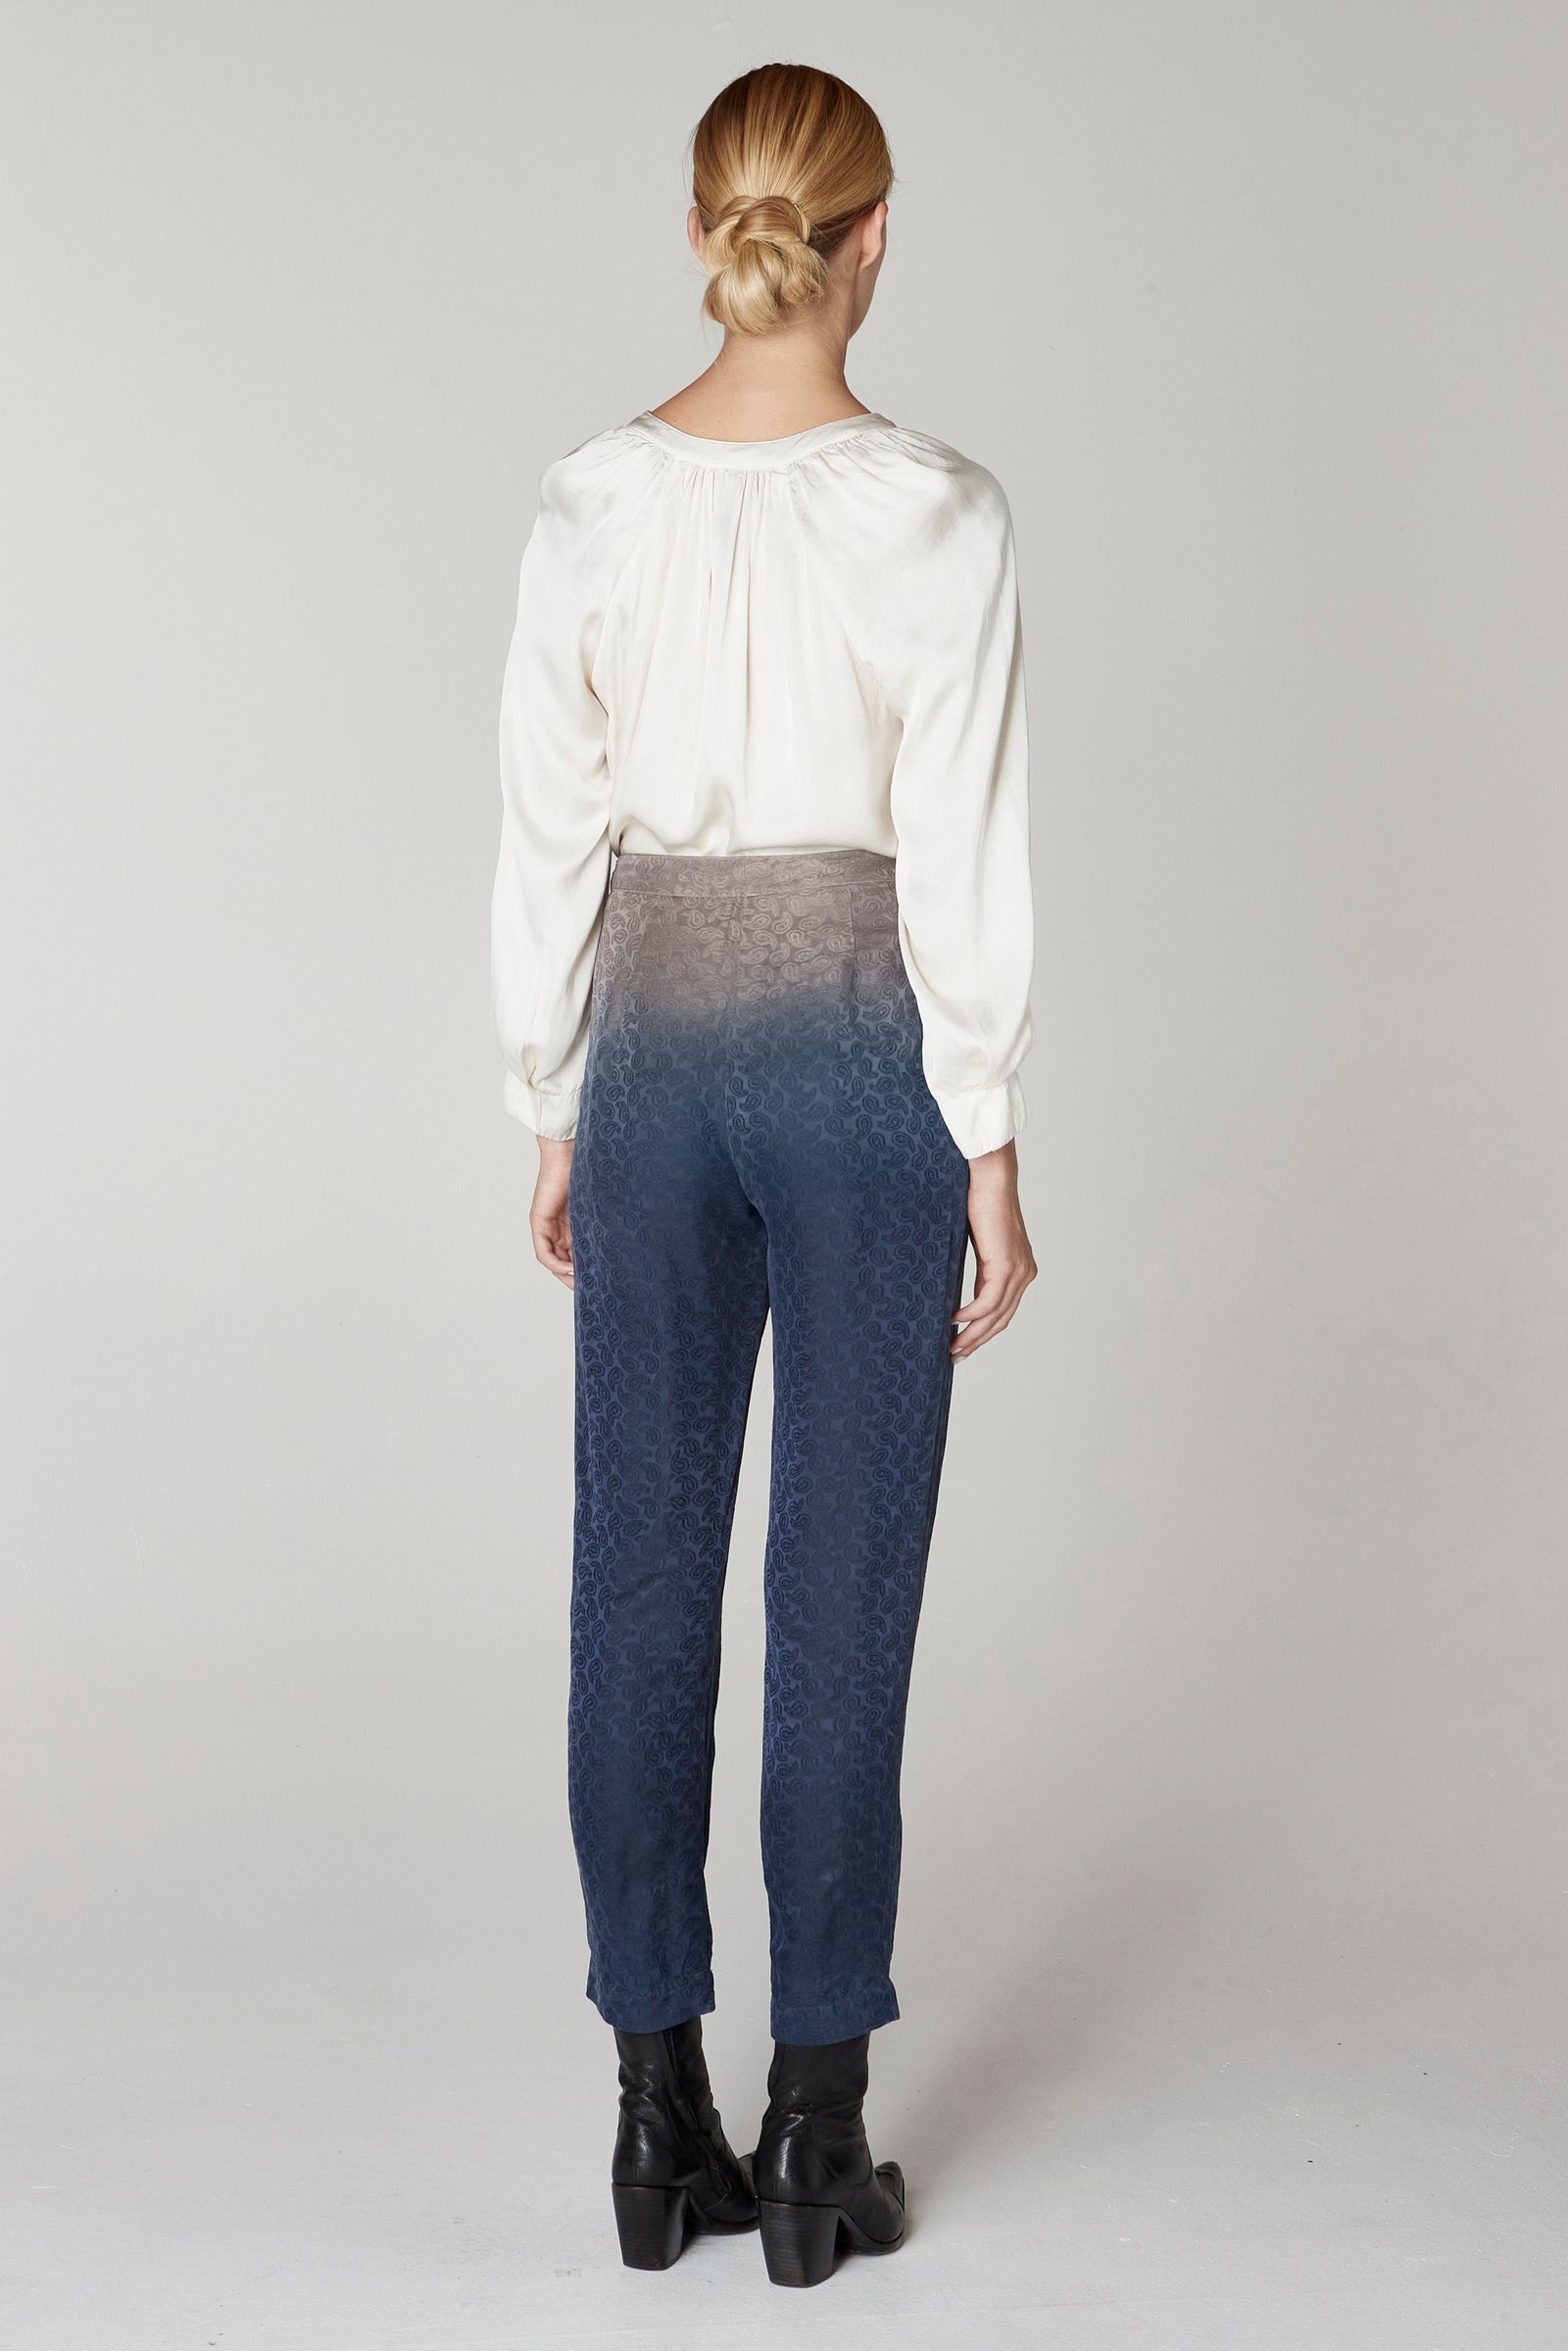 Dirty White Sparrow Top RA-TOP LASTCHANCE-PREFALL'23   